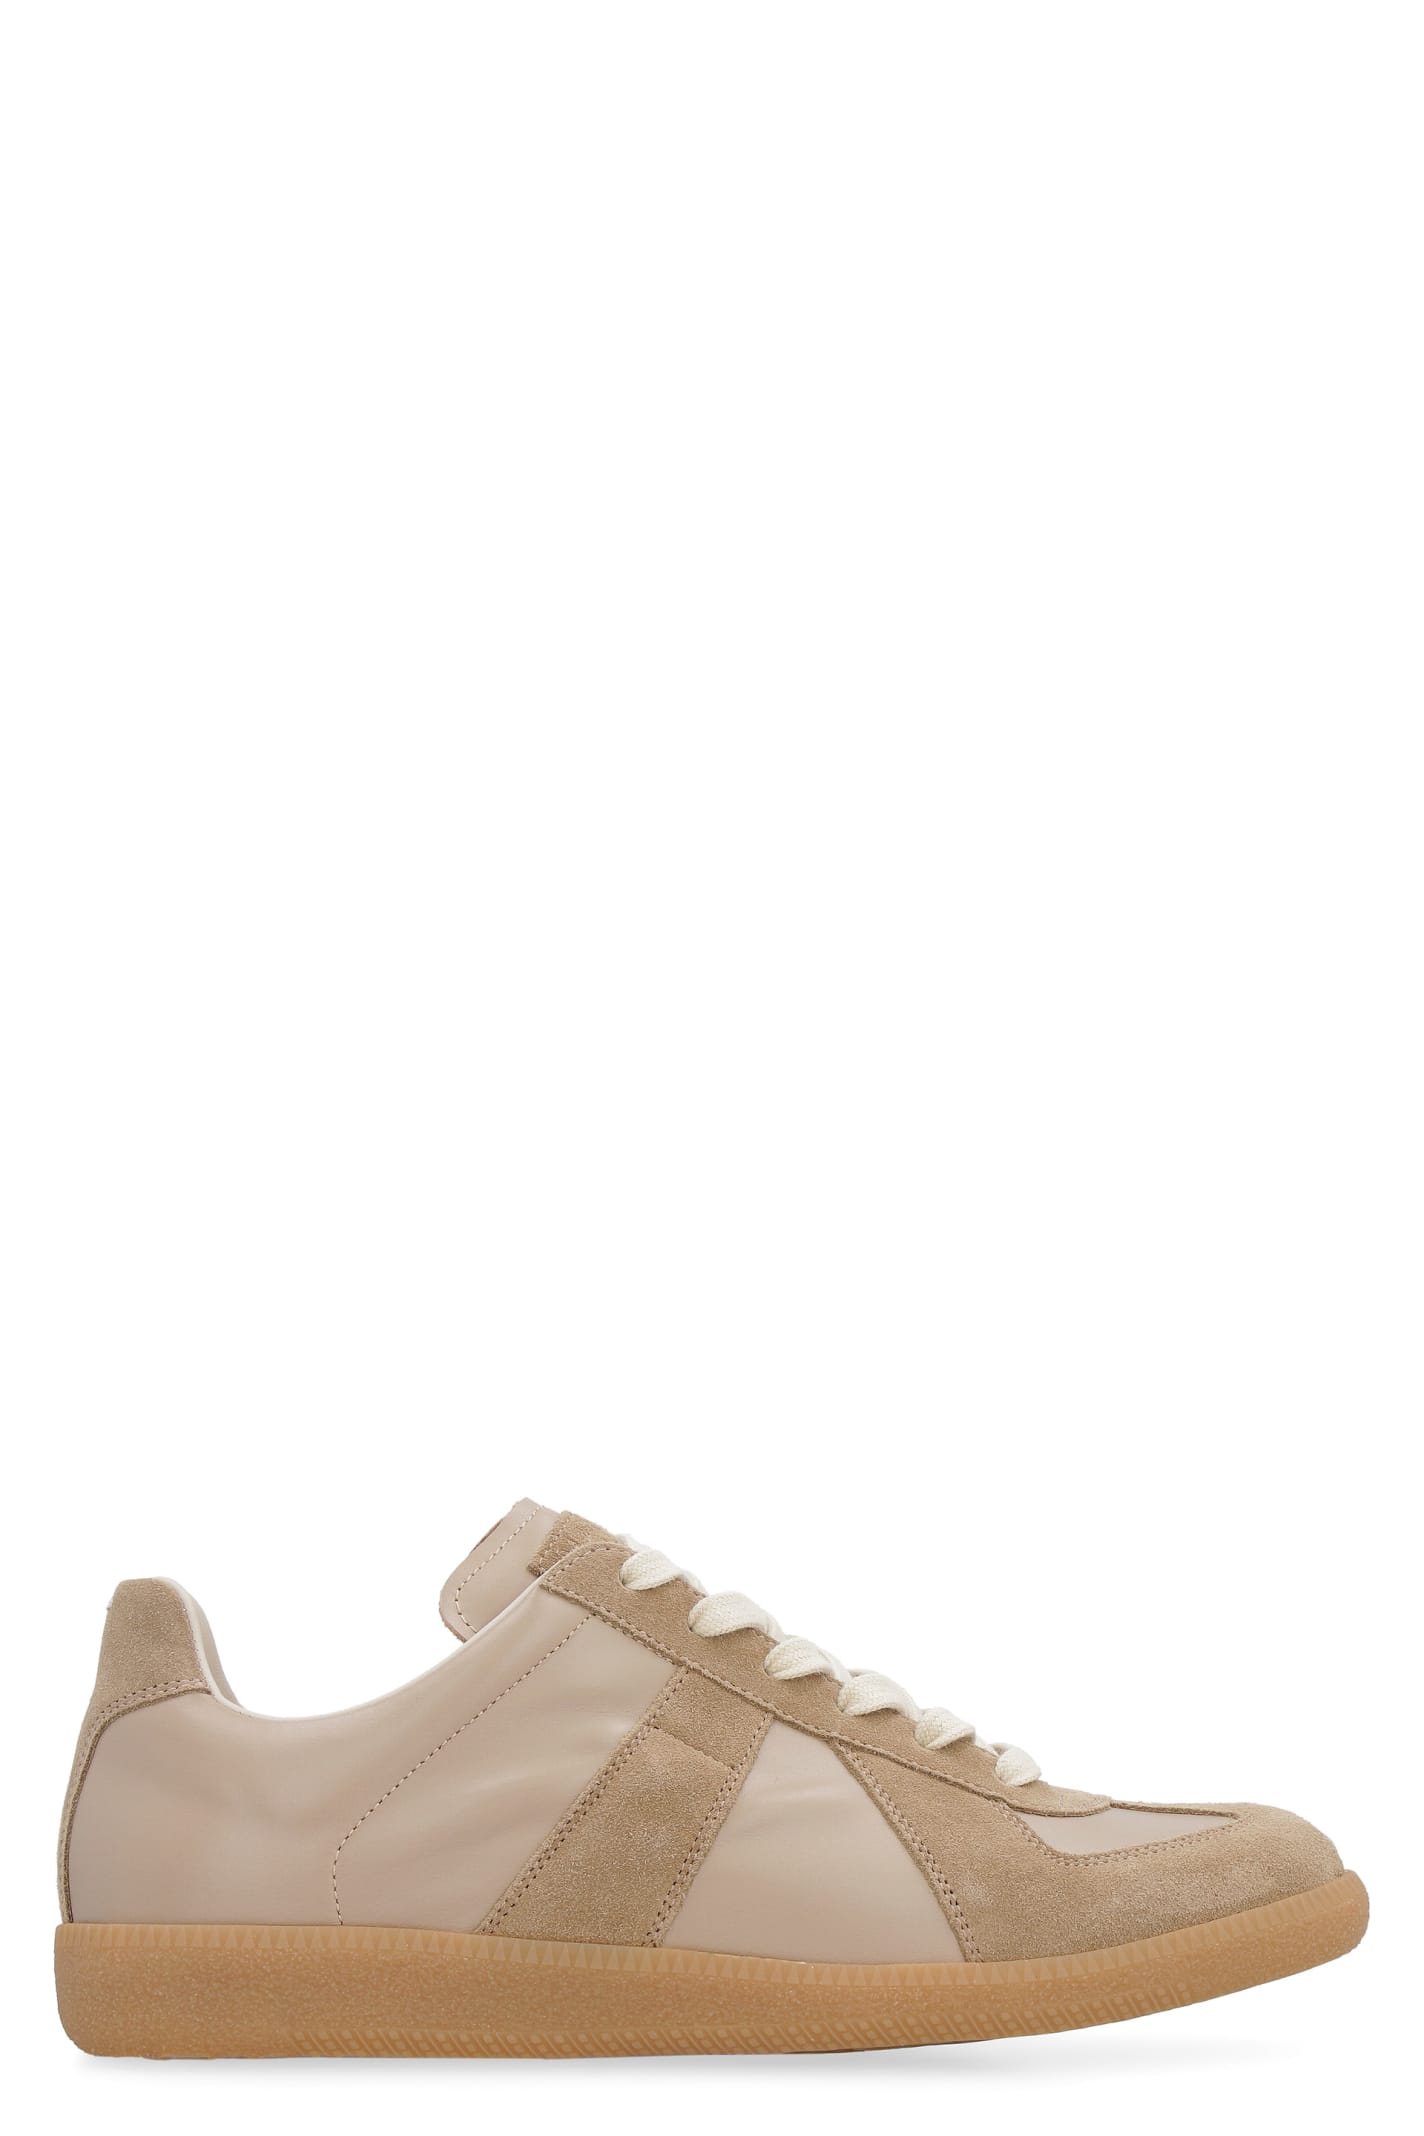 MAISON MARGIELA REPLICA LEATHER LOW-TOP trainers,S57WS0236P1895 T2076